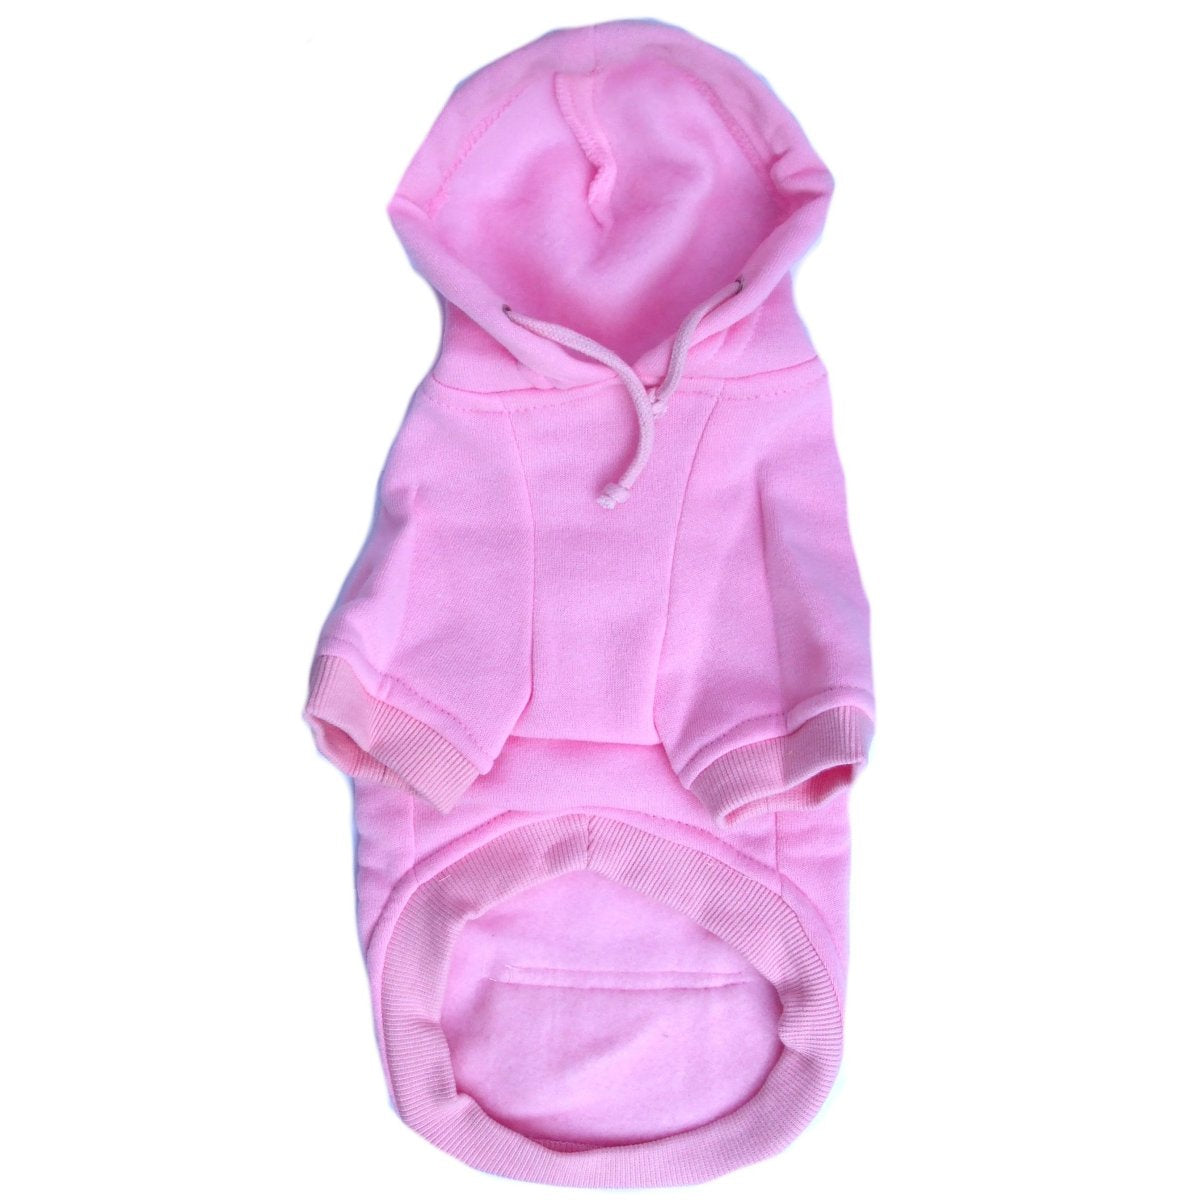 Cat Sweatshirt Hoody Pink - Clothes for Cats